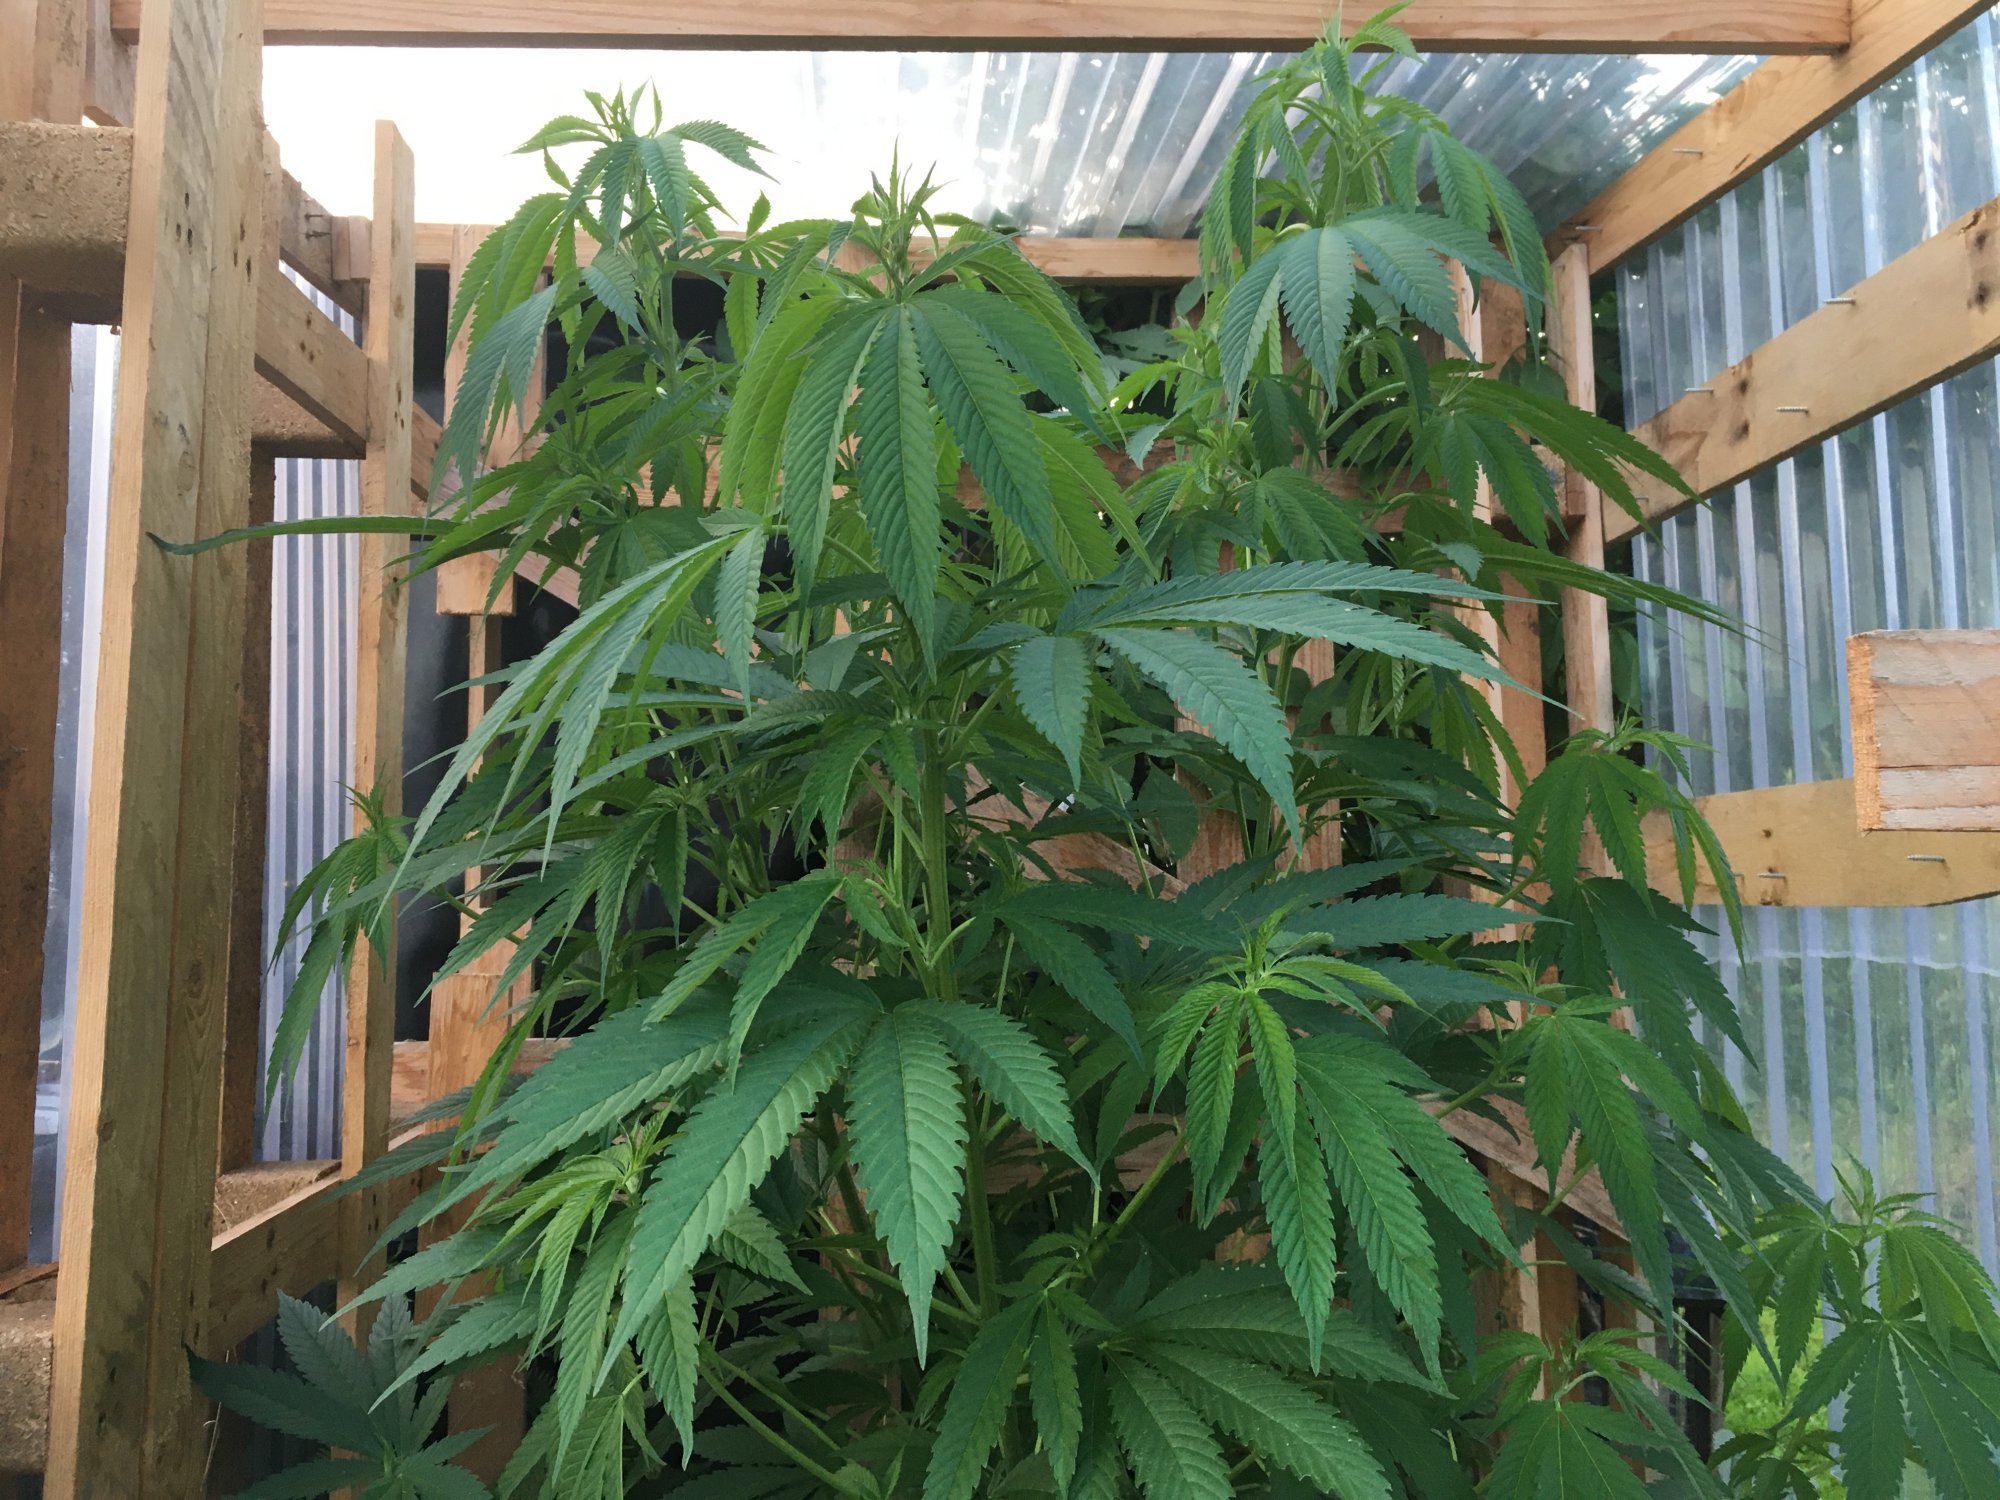 Chocolope growing too big for her home 2